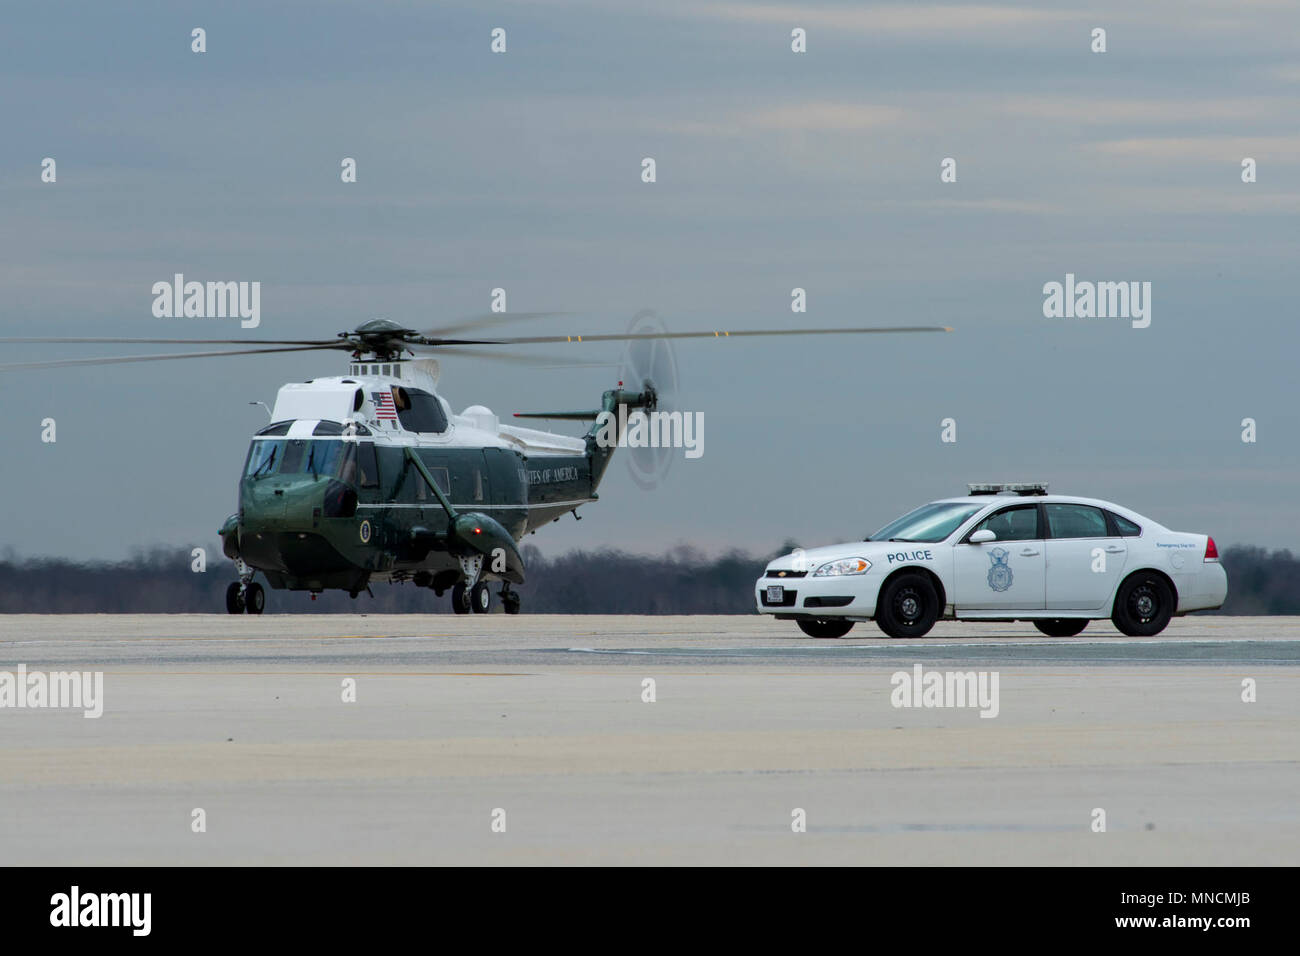 A Sikorsky VH-3D Sea King operated by Marine Helicopter Squadron One, sits on the runway near a security forces vehicle at Joint Base Andrews, Md., March 19, 2018. Stock Photo